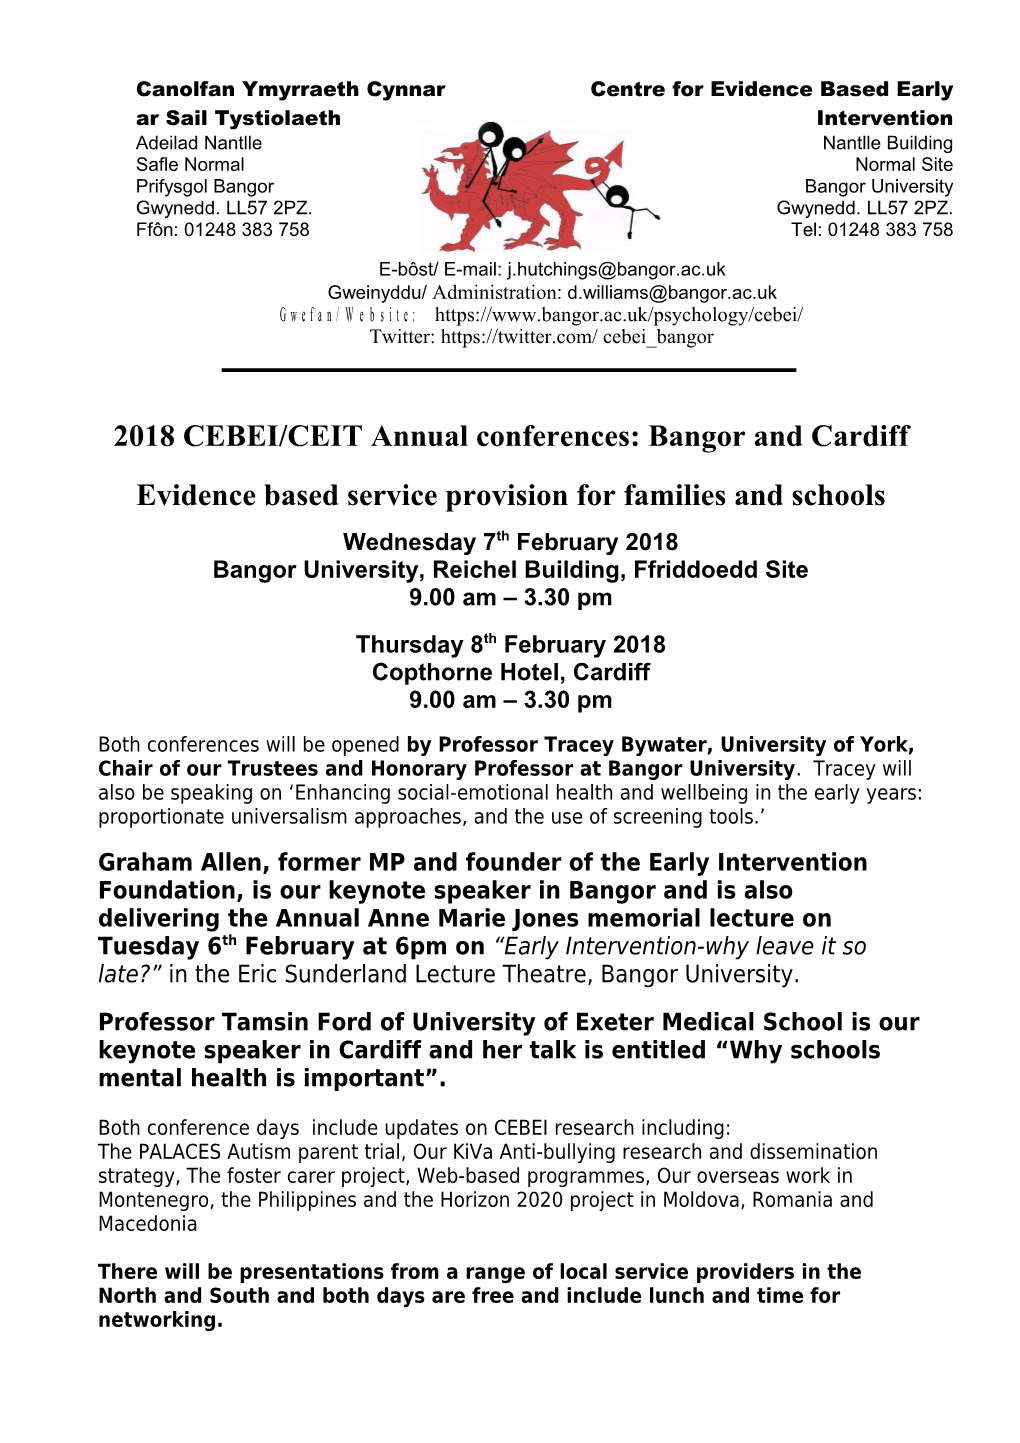 2018 CEBEI/CEIT Annual Conferences: Bangor and Cardiff